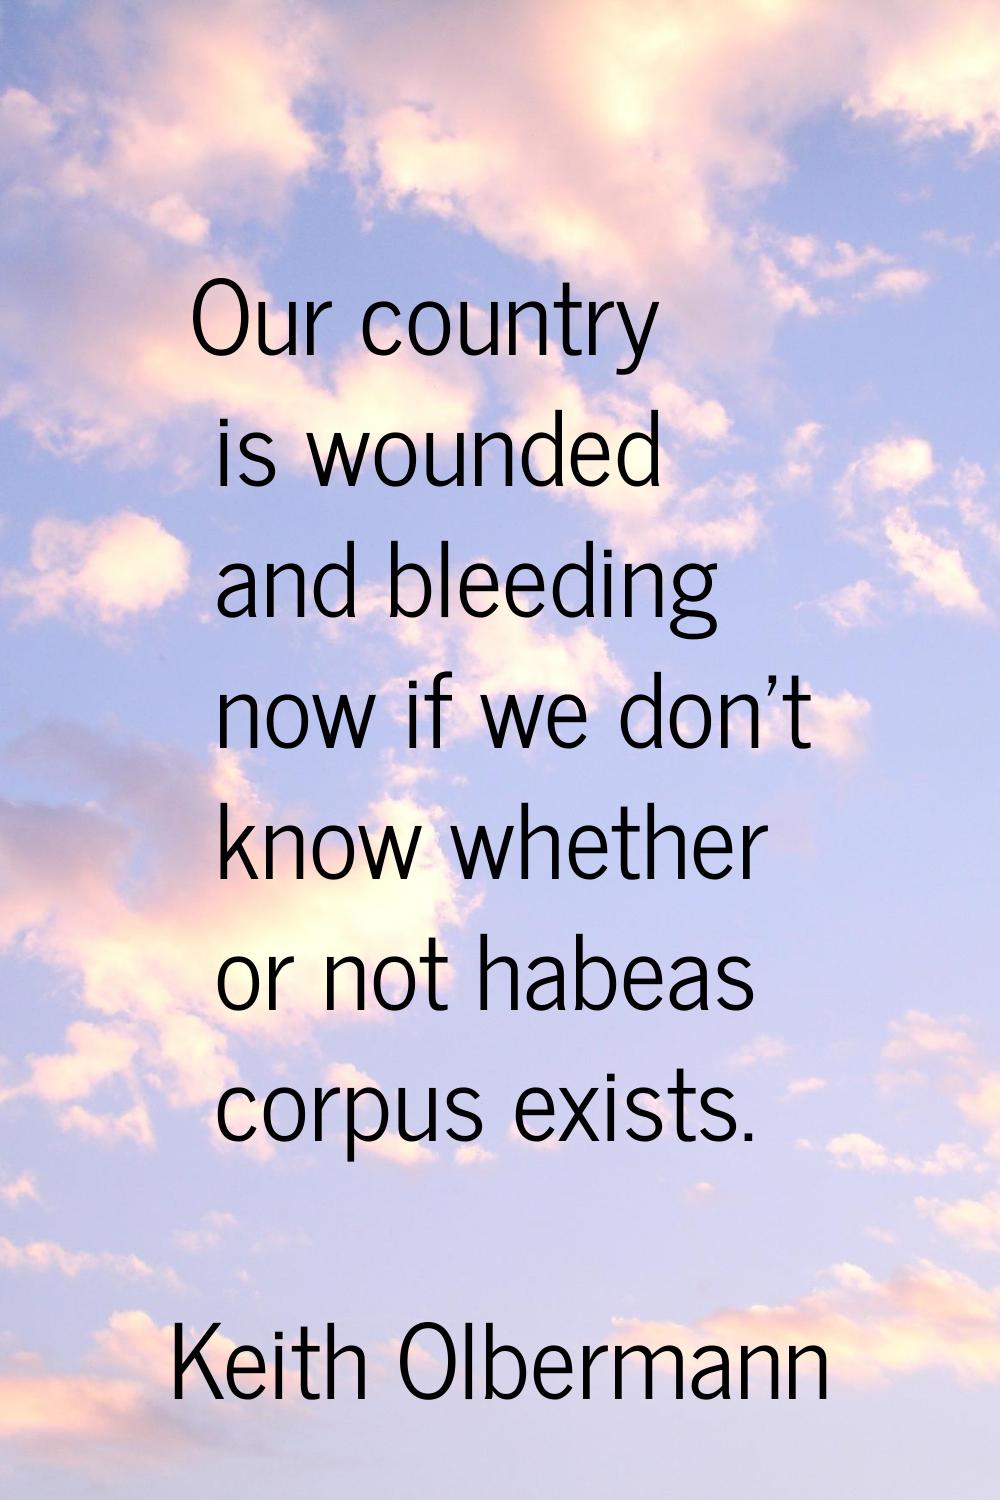 Our country is wounded and bleeding now if we don't know whether or not habeas corpus exists.